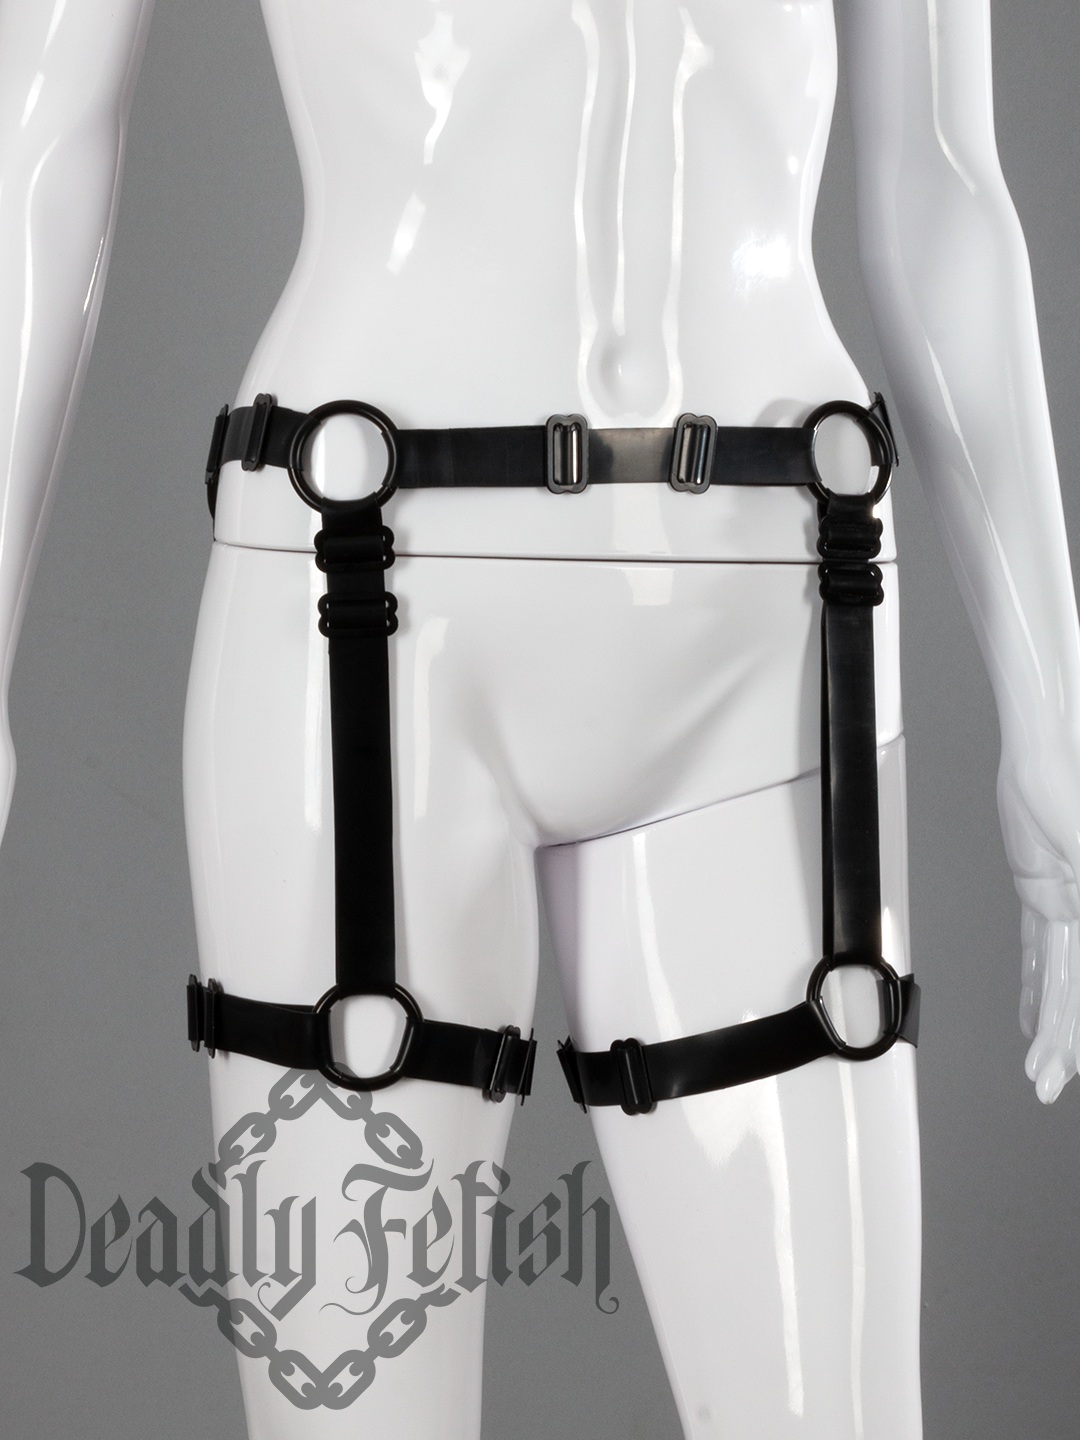 Deadly Fetish Made-to-Order Latex: Basic Harness #02